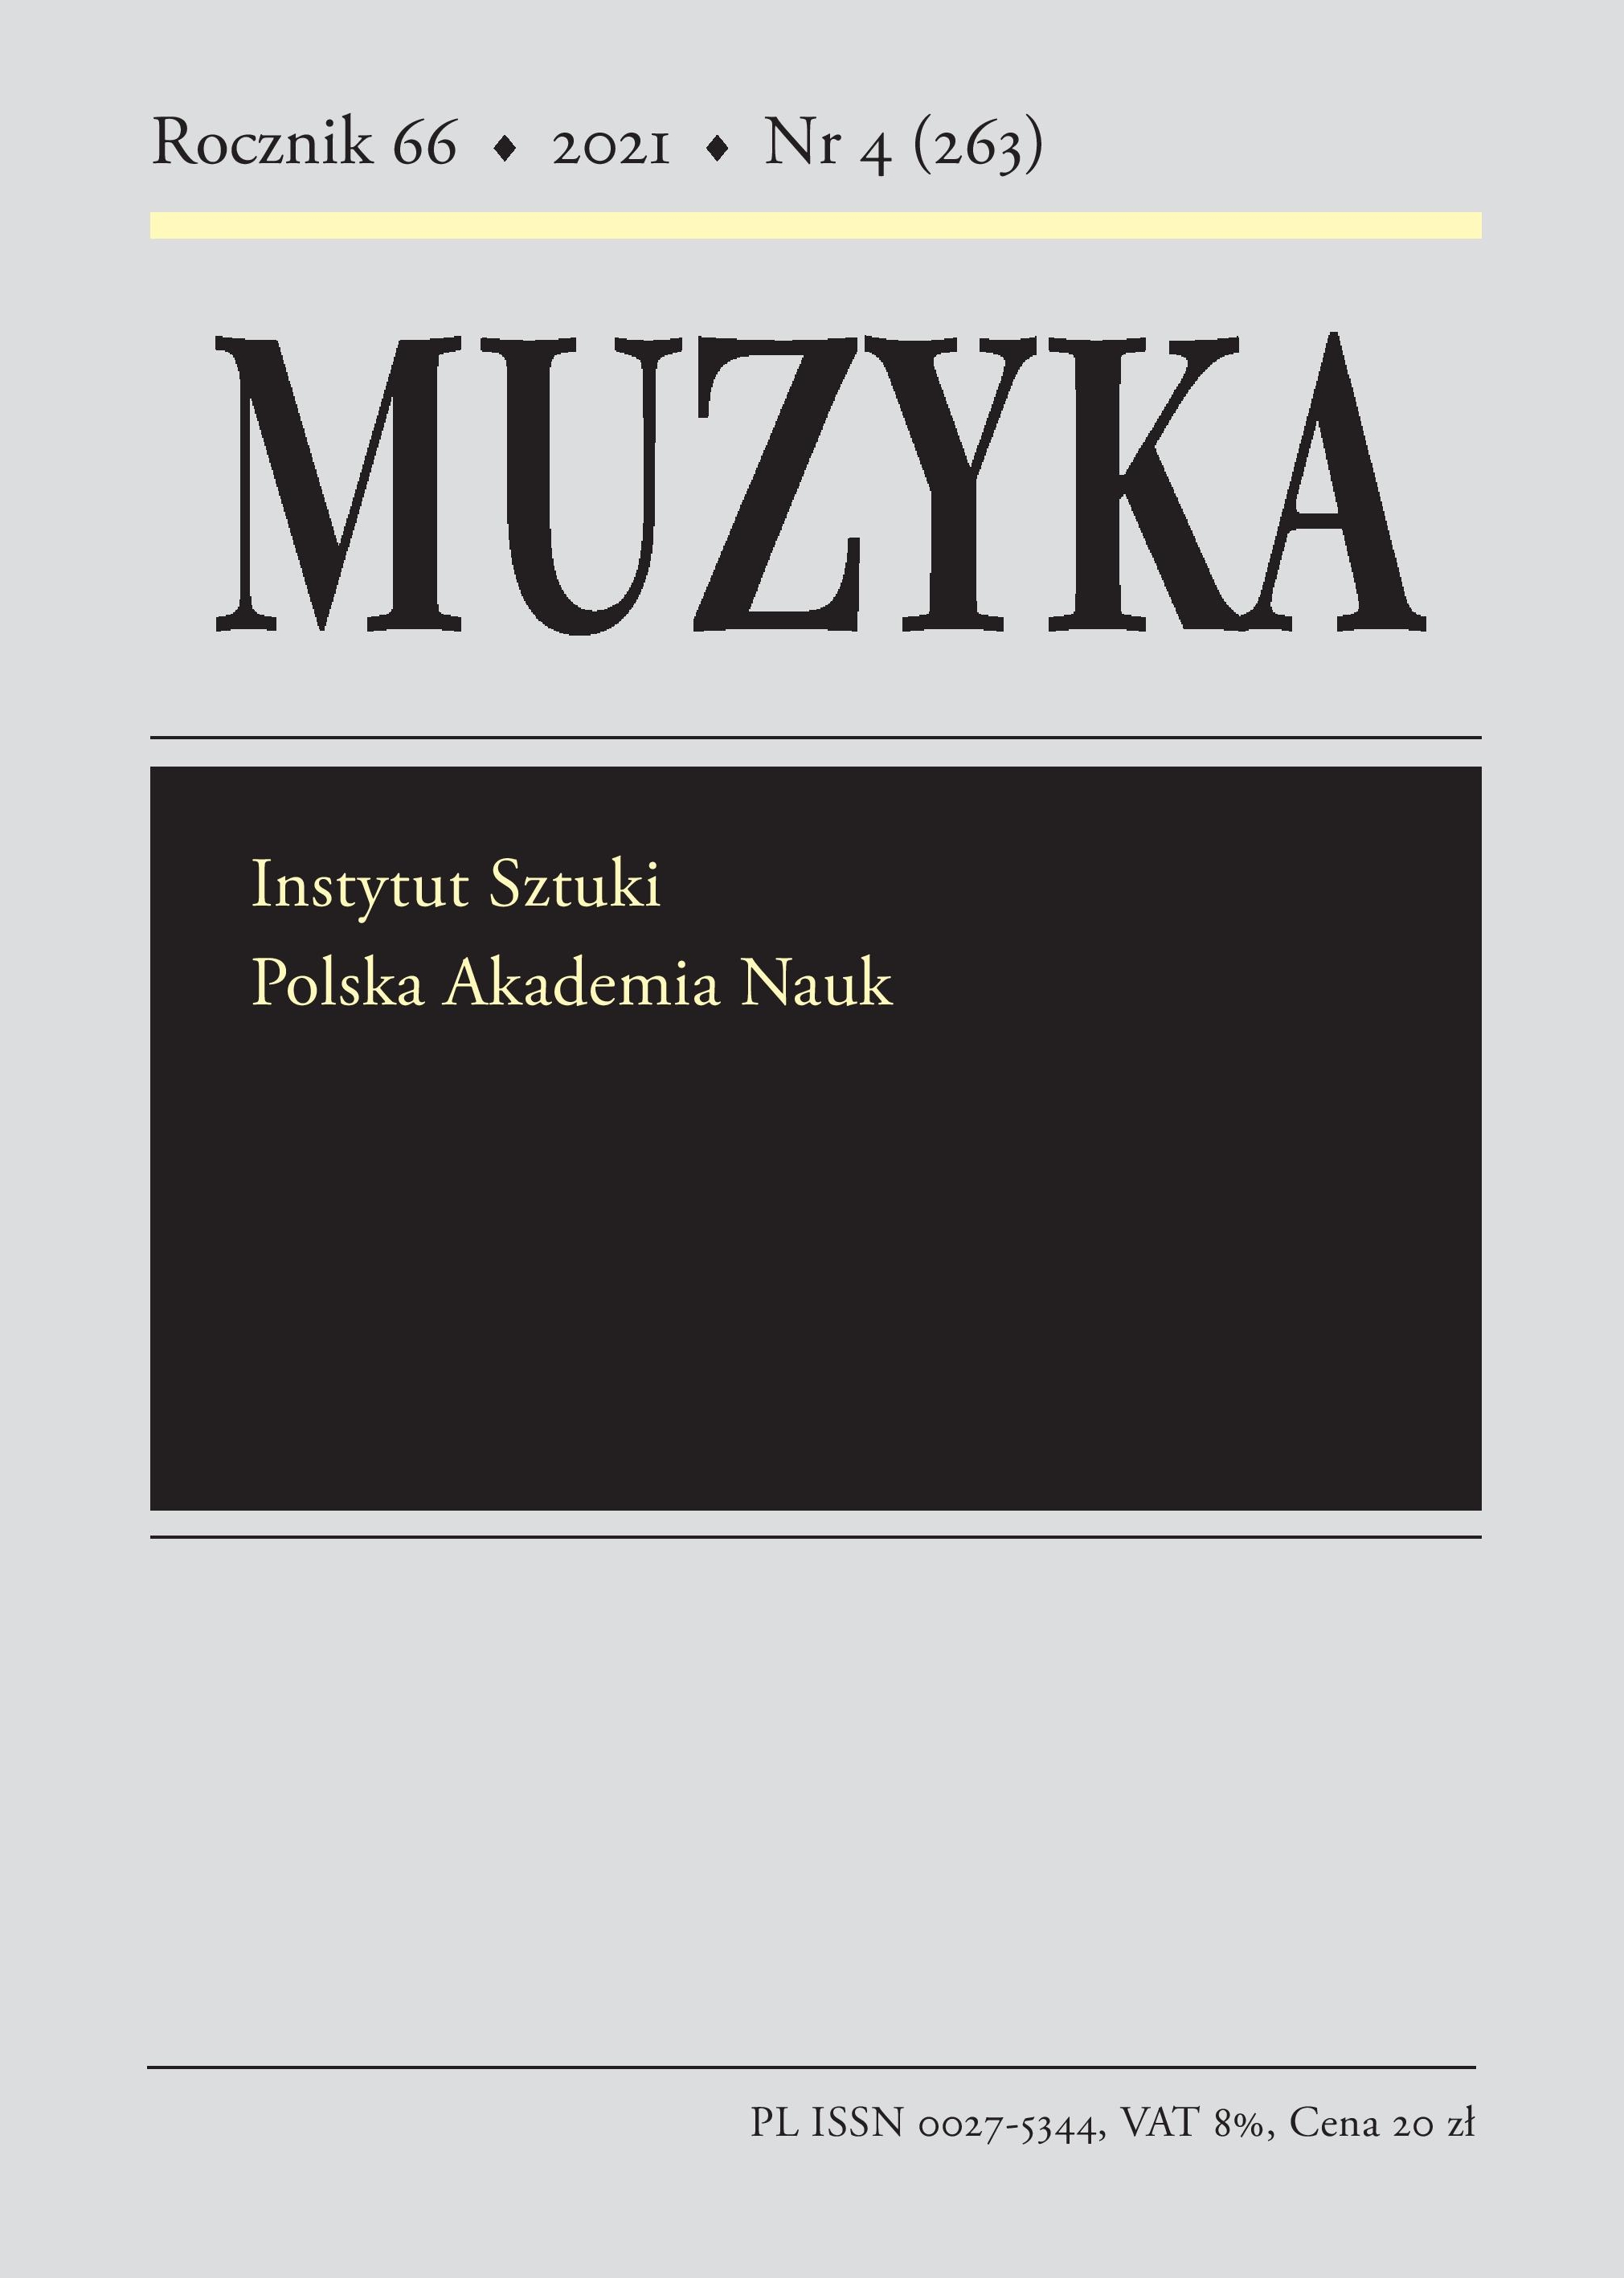 „Witold Lutosławski. Correspondence with His Western Publishers and Managers. 1966–1994”, red. Zbigniew Skowron, T. 1–2, Kraków 2018